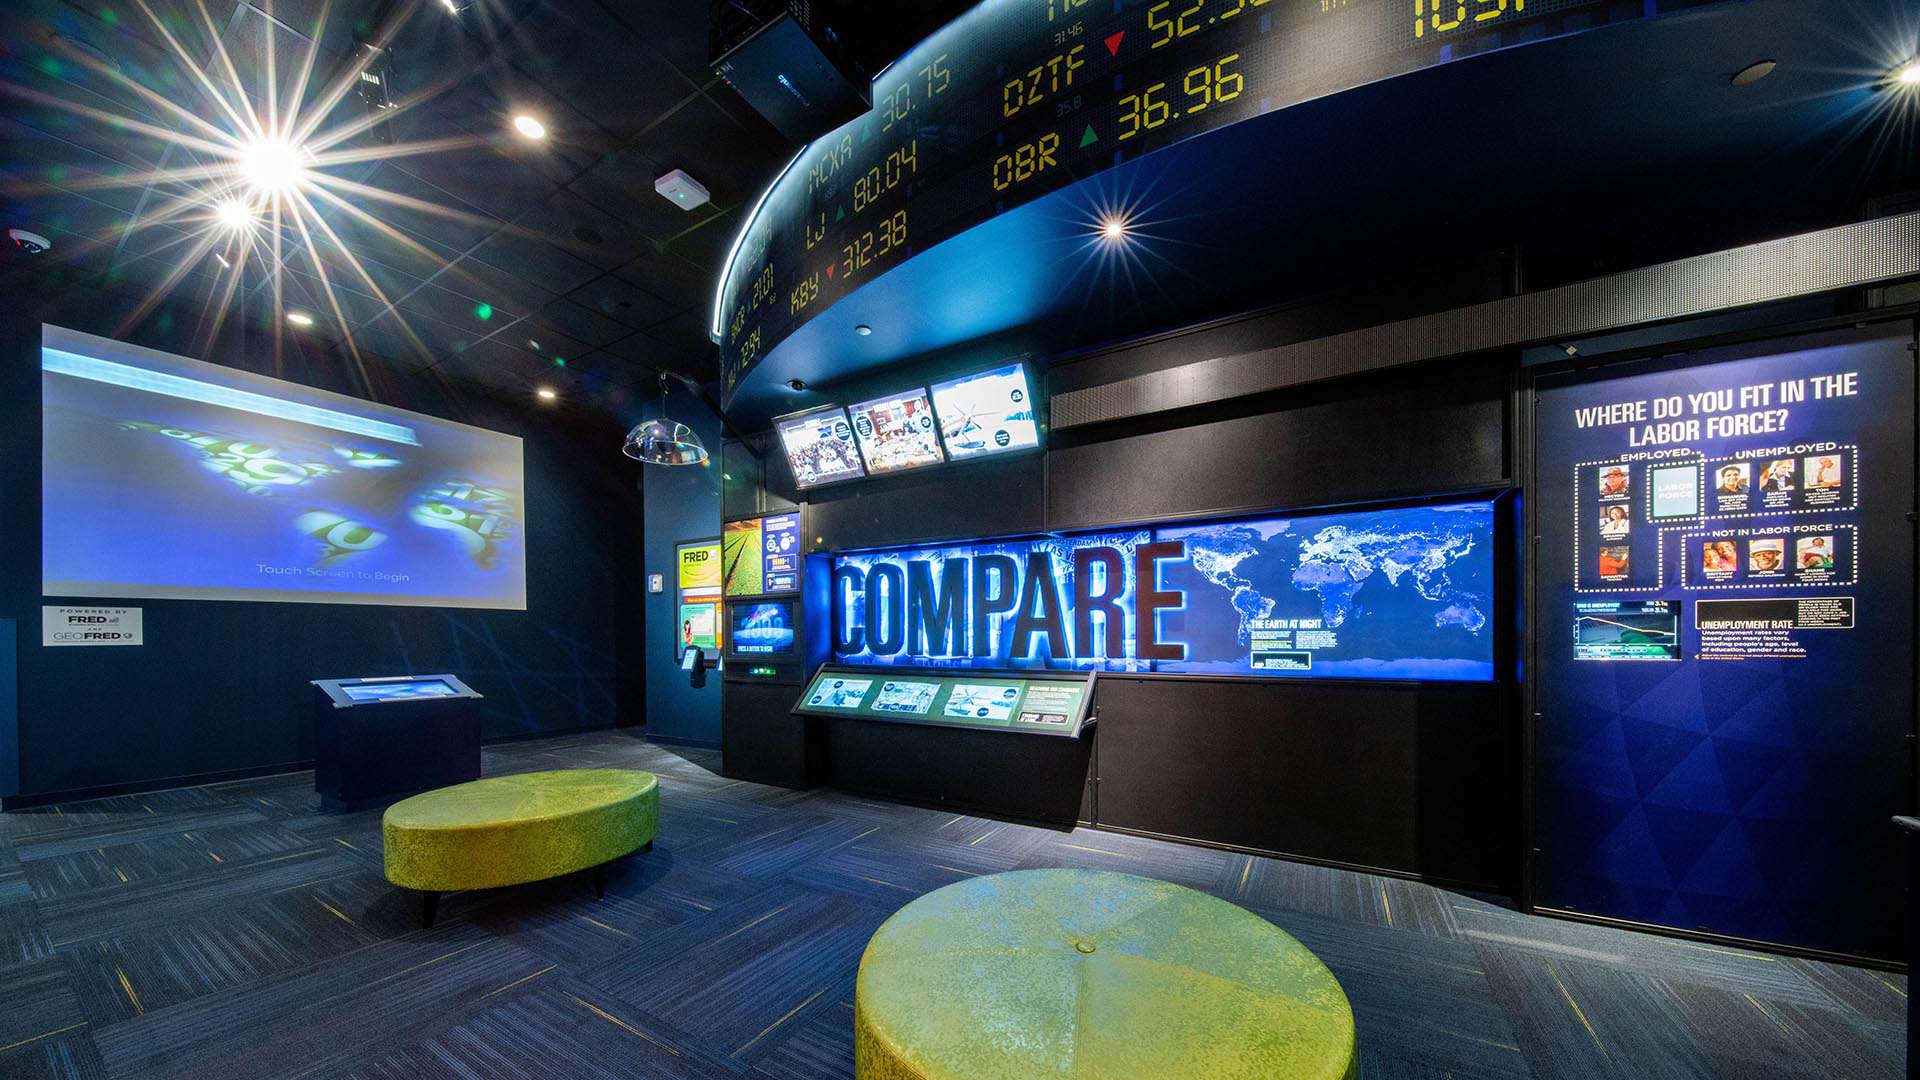 Digital displays line the walls. A large sign that reads "Compare" is in the middle. 